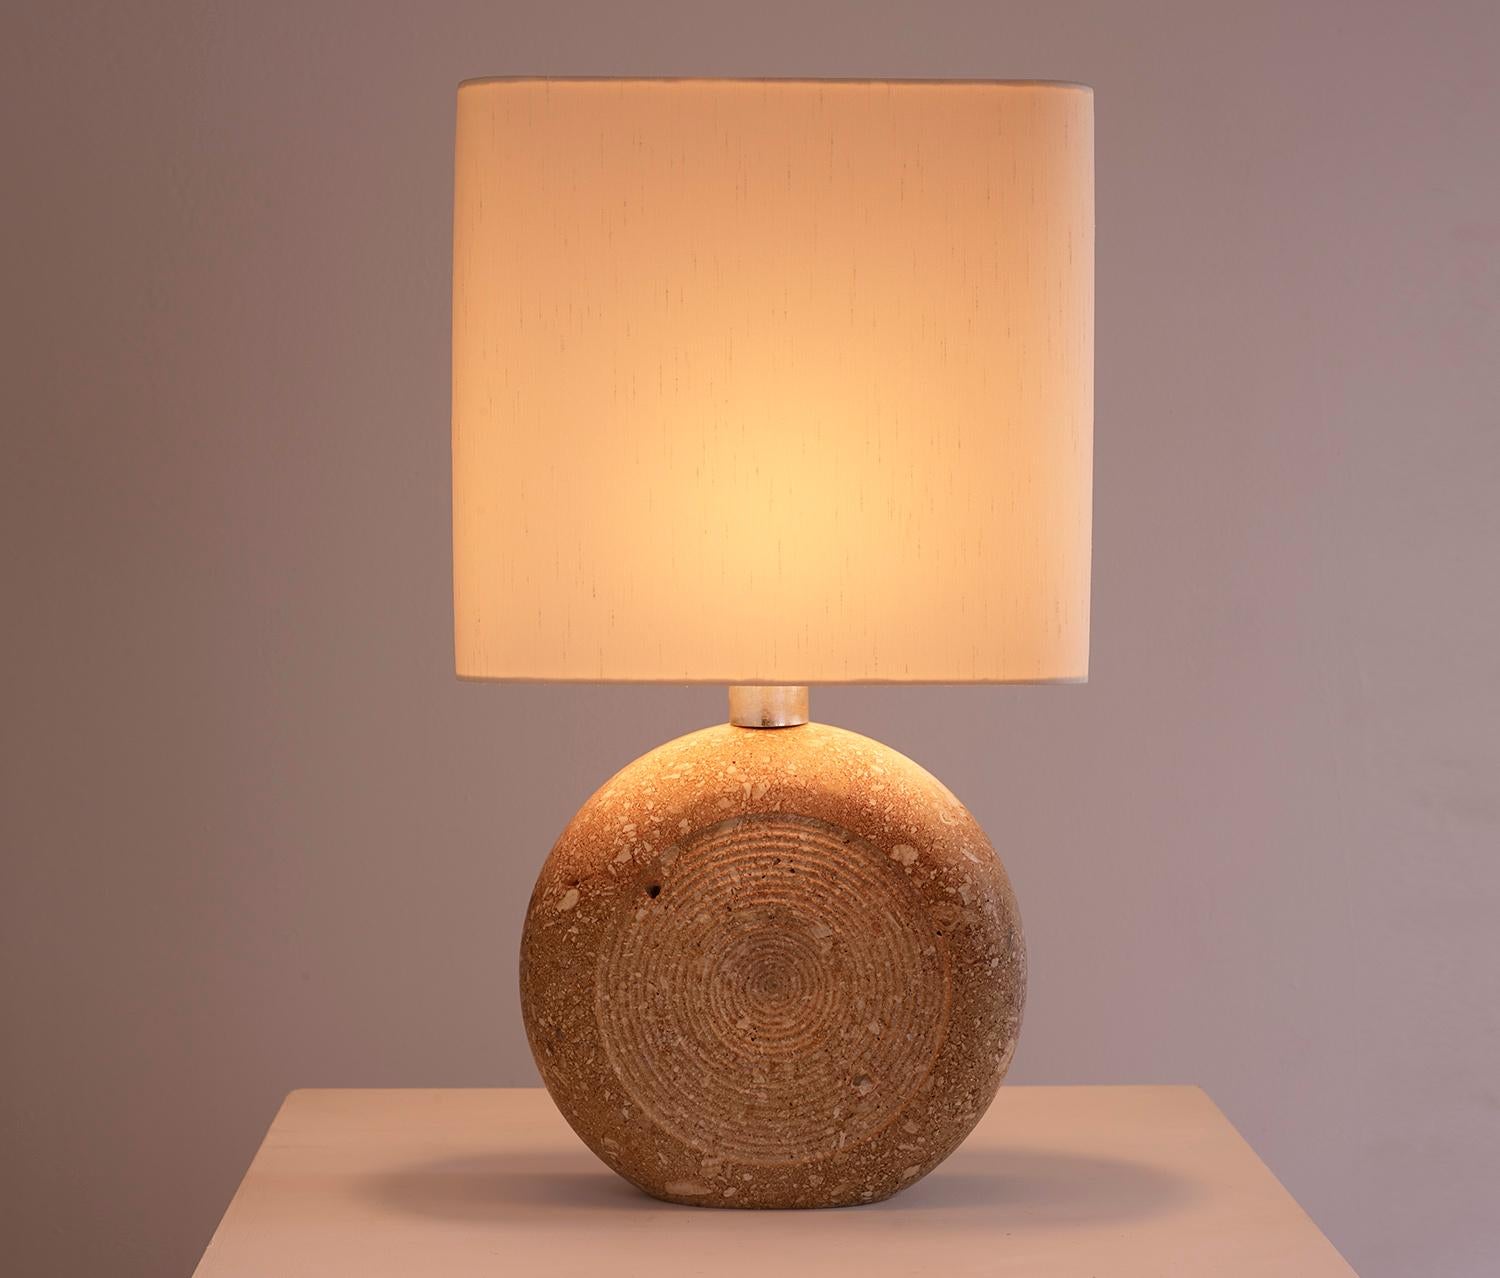 Italian travertine and silk shade table lamp by Fratelli Mannelli, Italy, 1970.

Very elegant and heavy table lamp by Fratelli Mannelli, Italian editor of travertine objects and lamps around 1970.

The circular base boasts a design of concentric